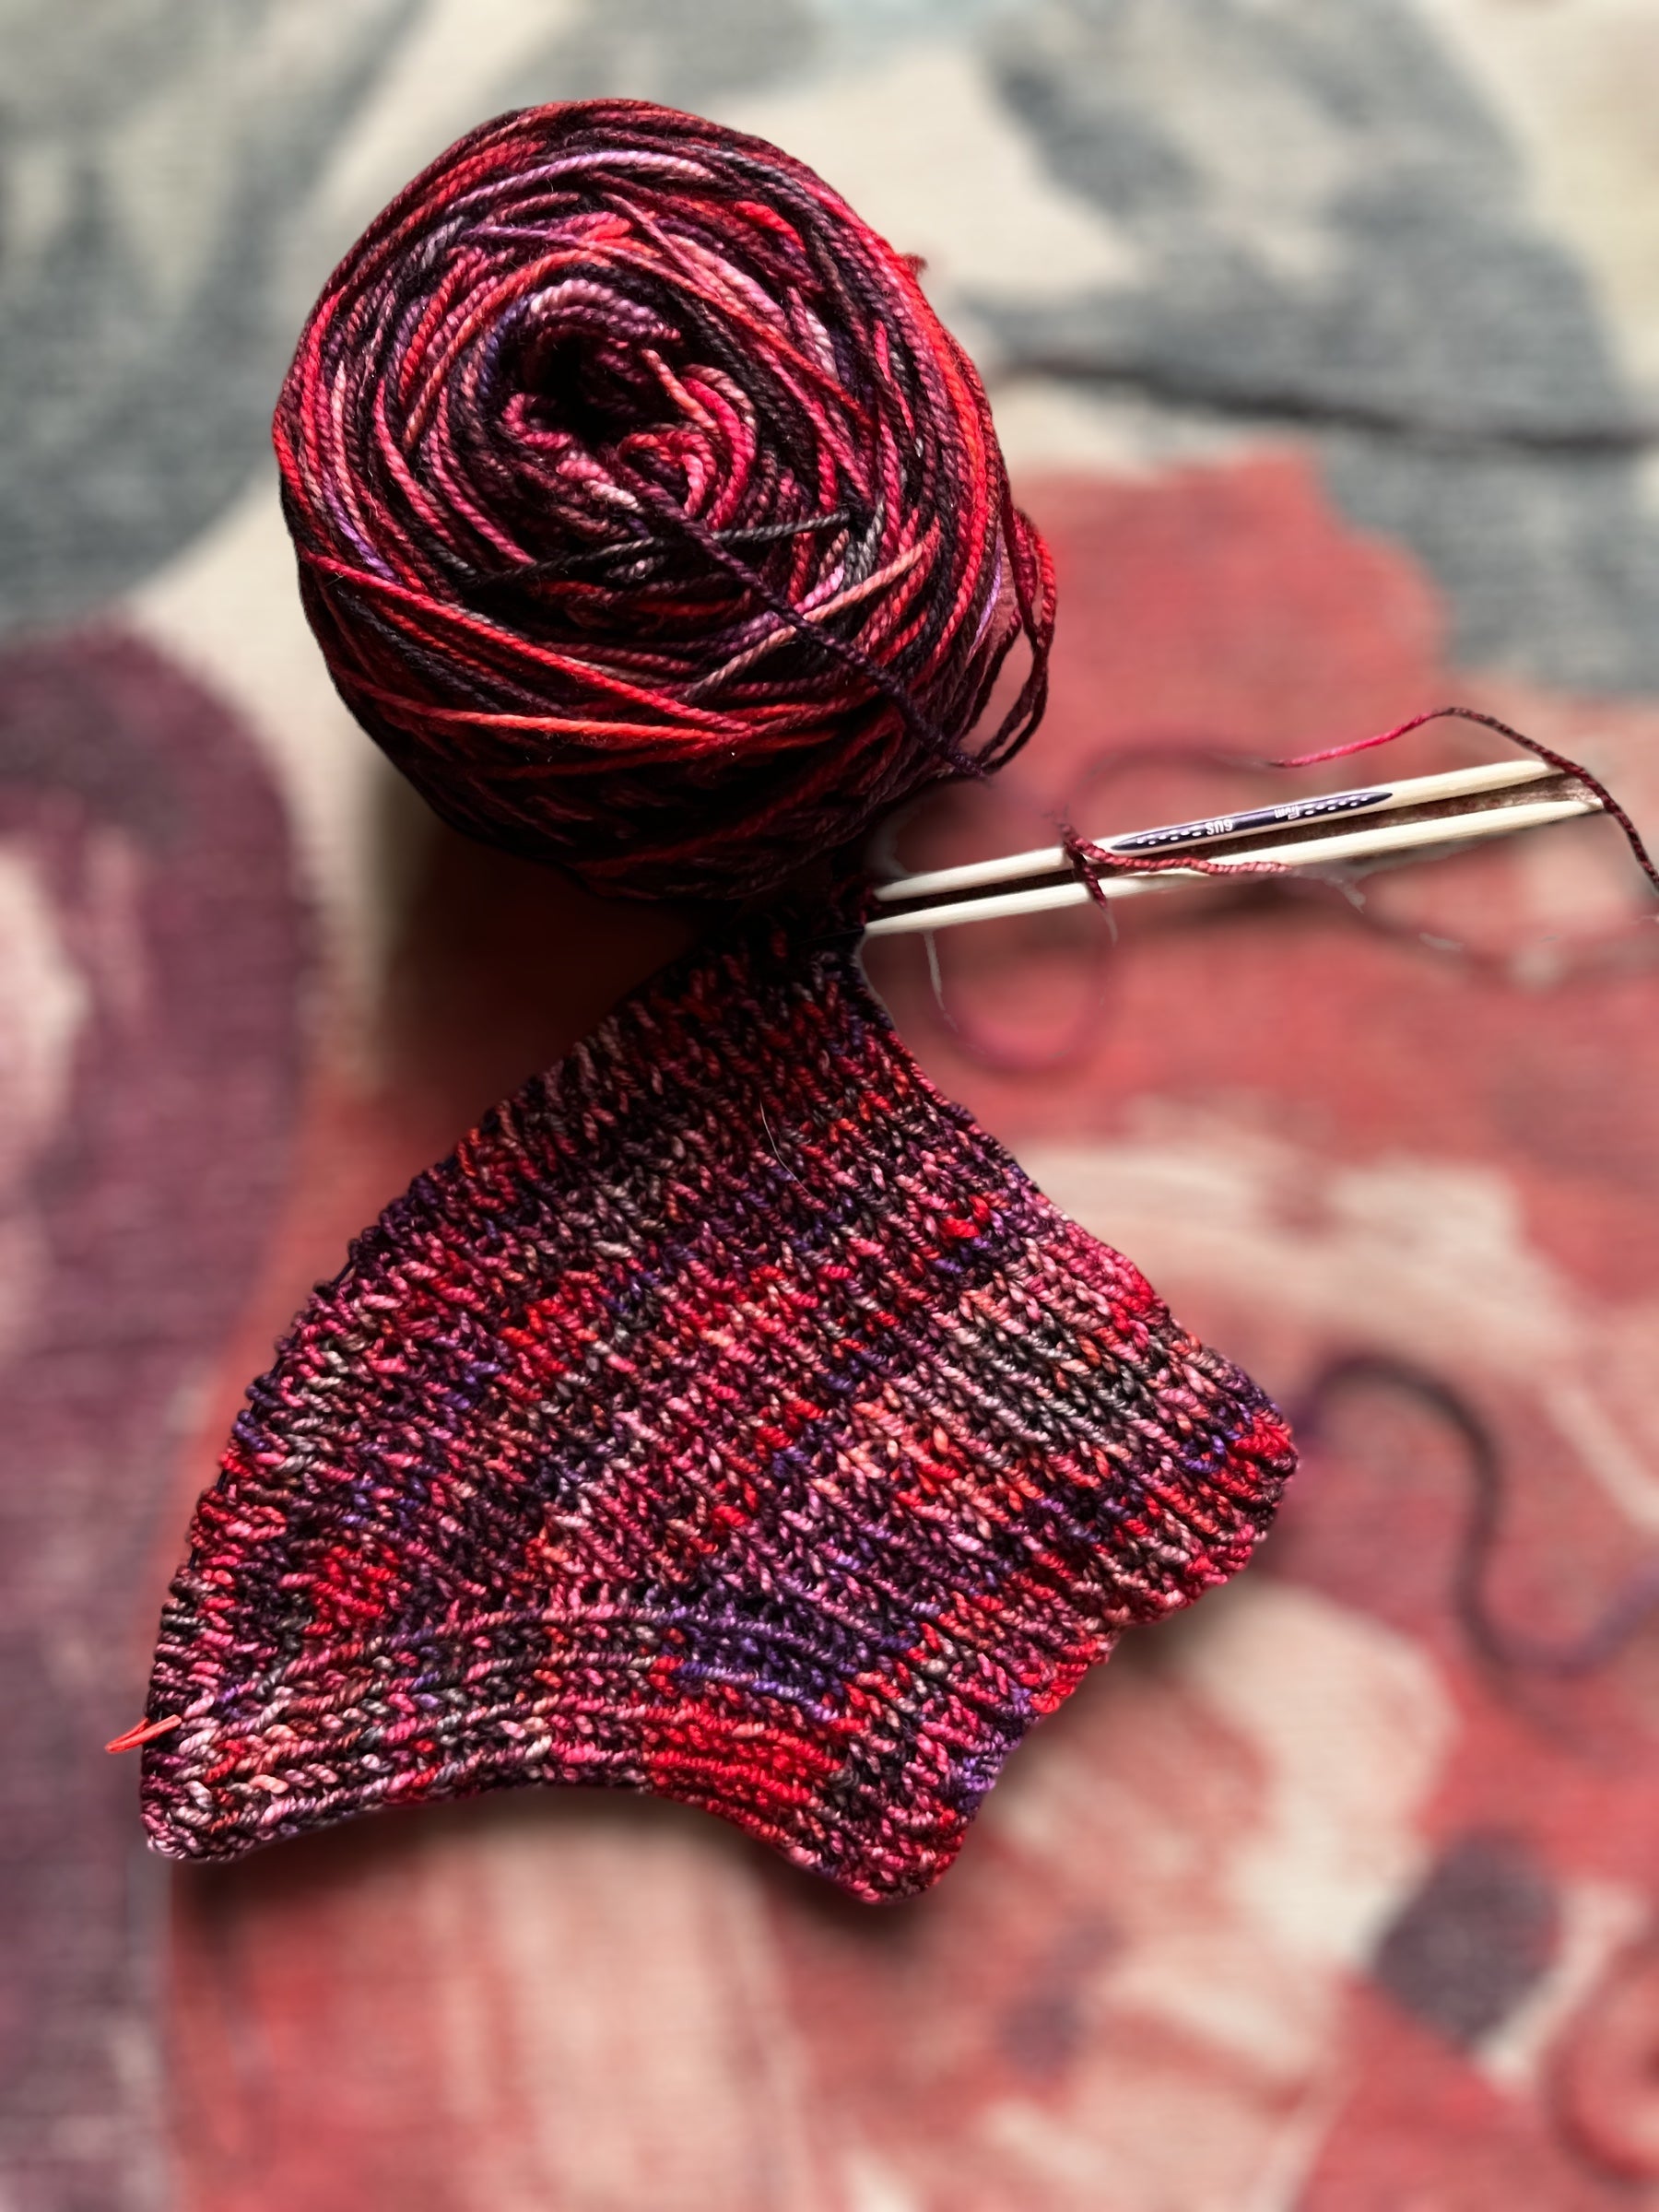 How to Crochet with Hand Dyed Yarn - The Unraveled Mitten